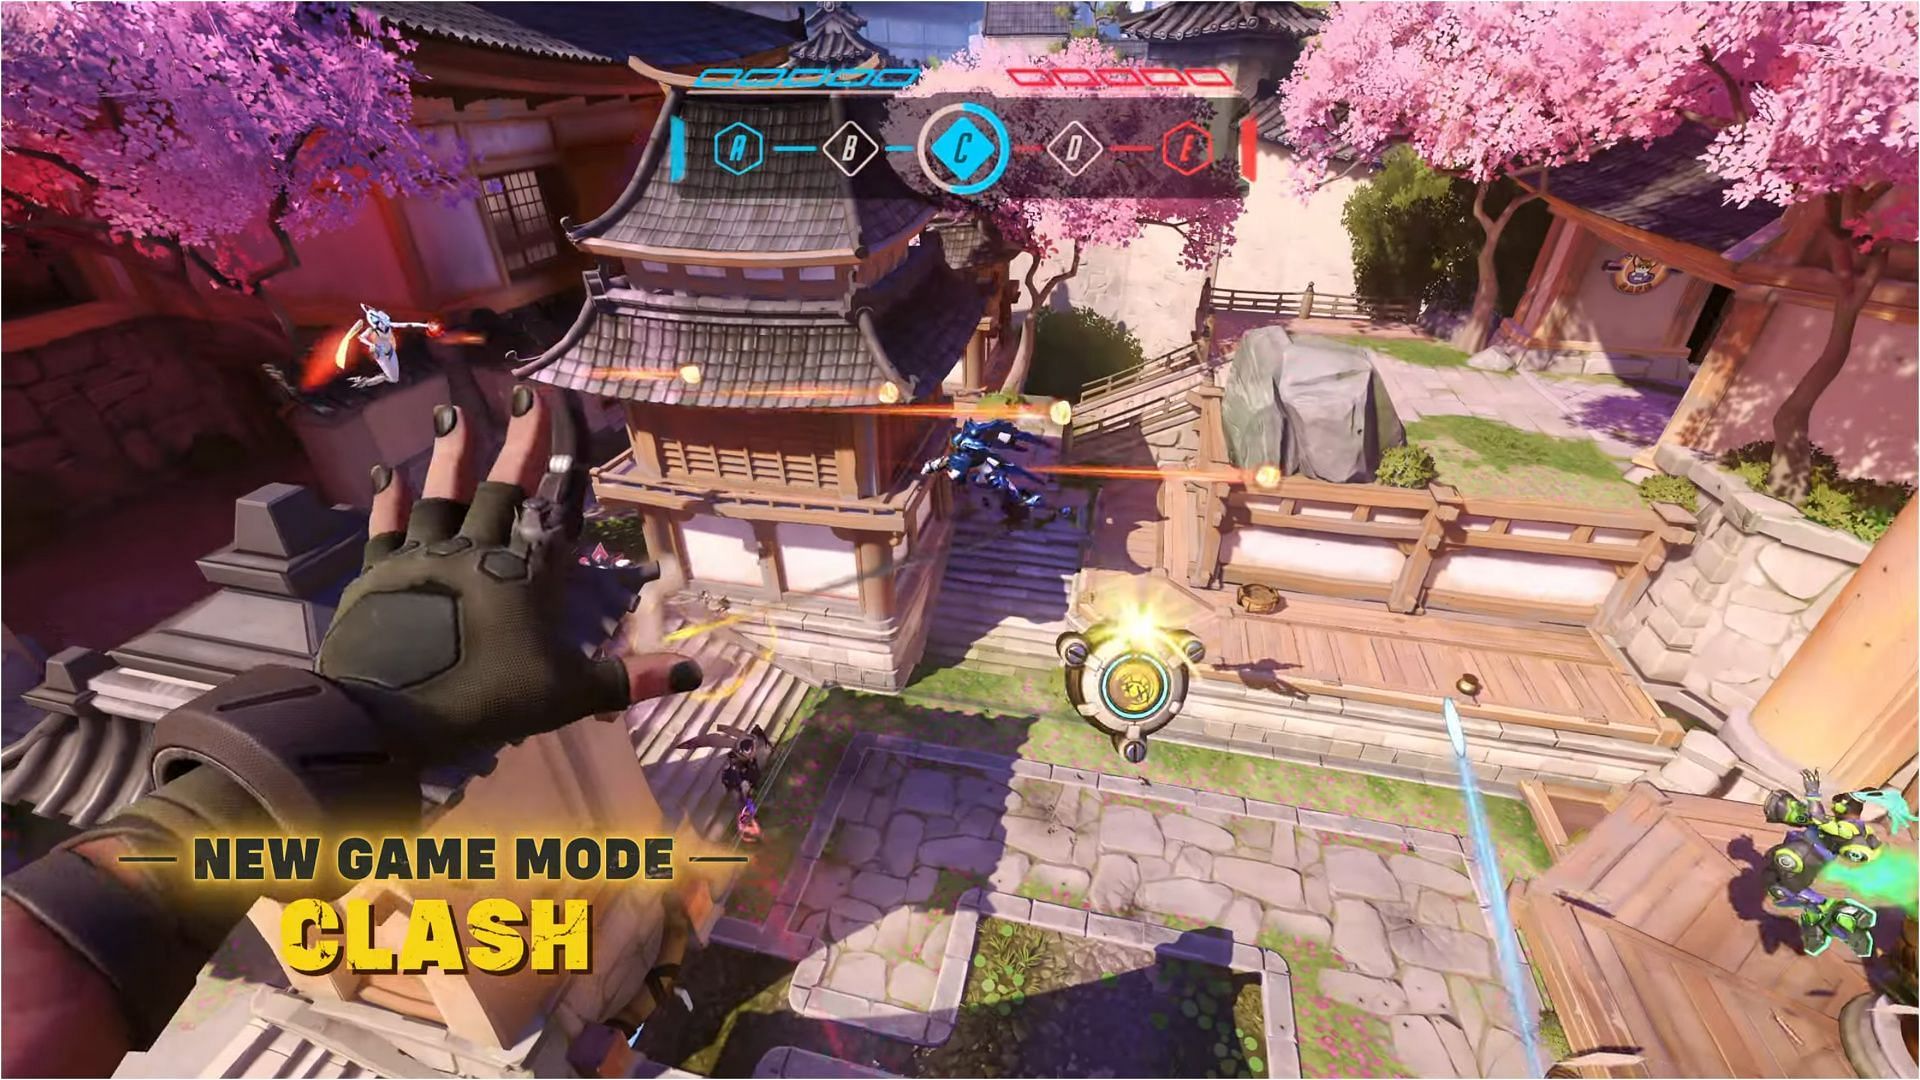 Clash is one of the new event modes as per the Overwatch 2 Season 10 roadmap (Image via Blizzard Entertainment)